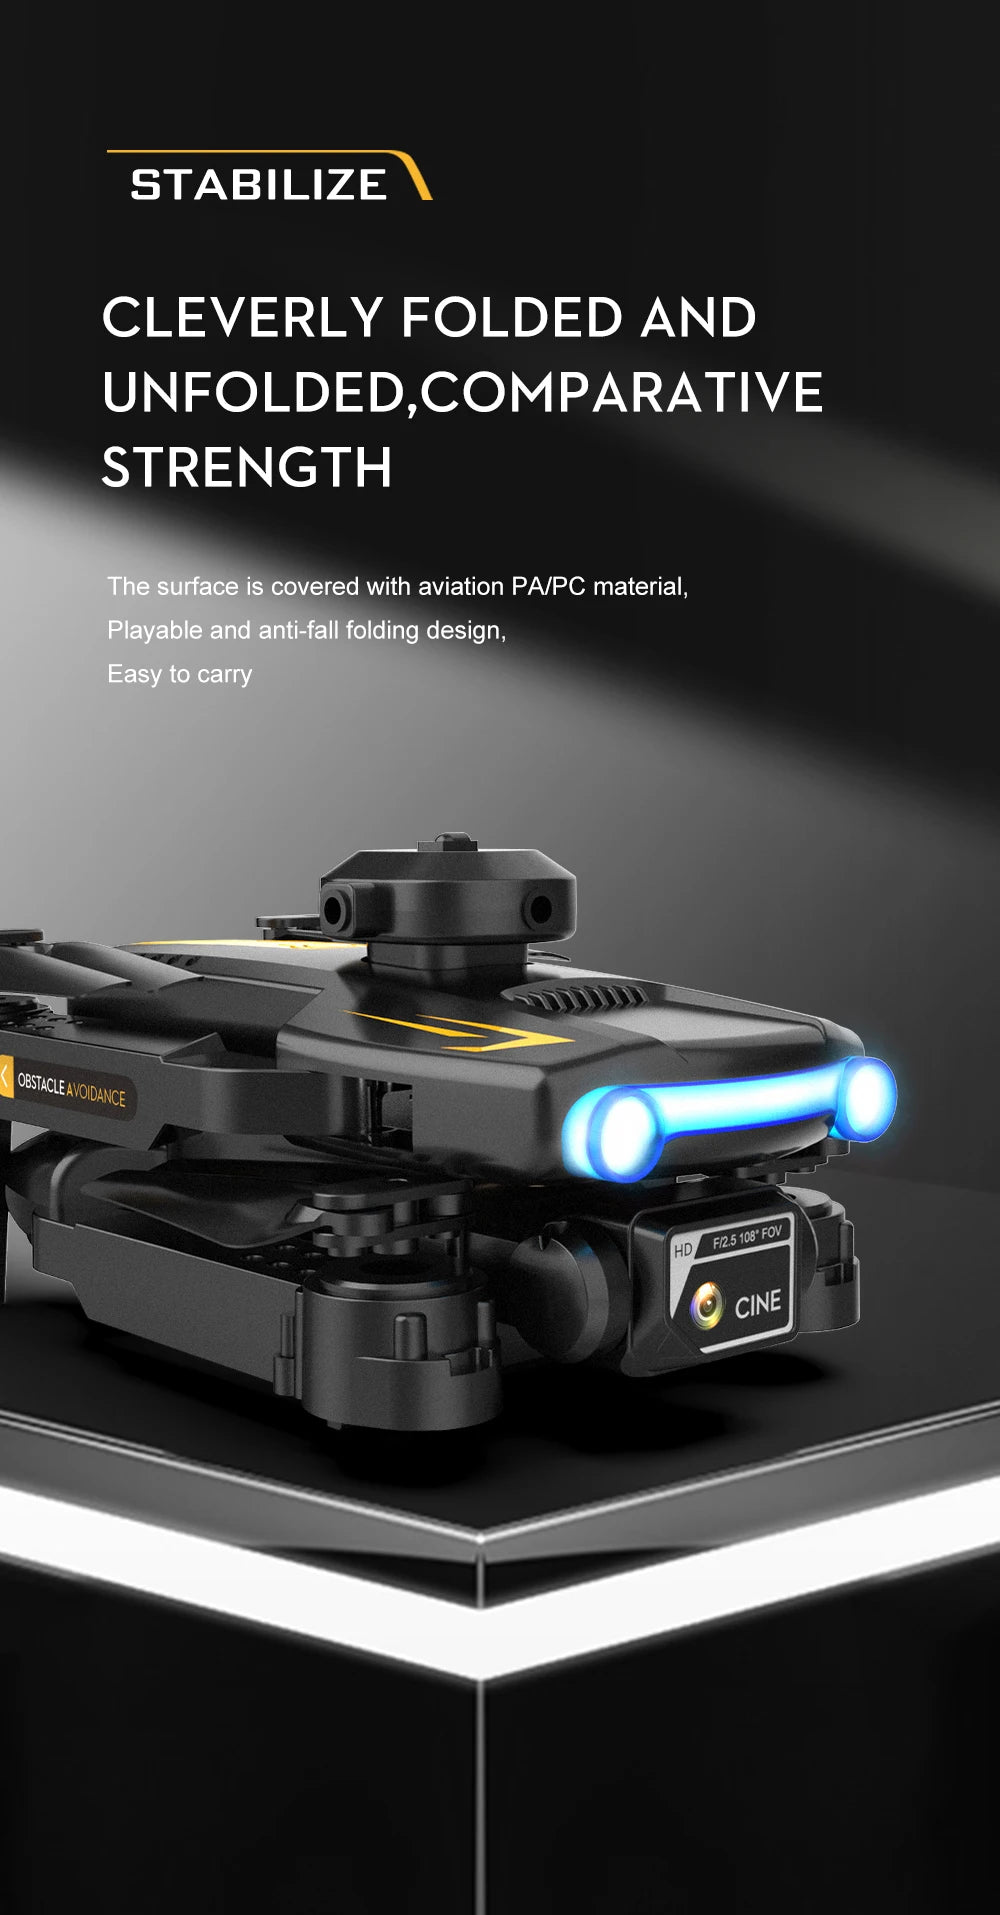 LSRC XT2 Drone, the surface is covered with aviation papc material, playable and